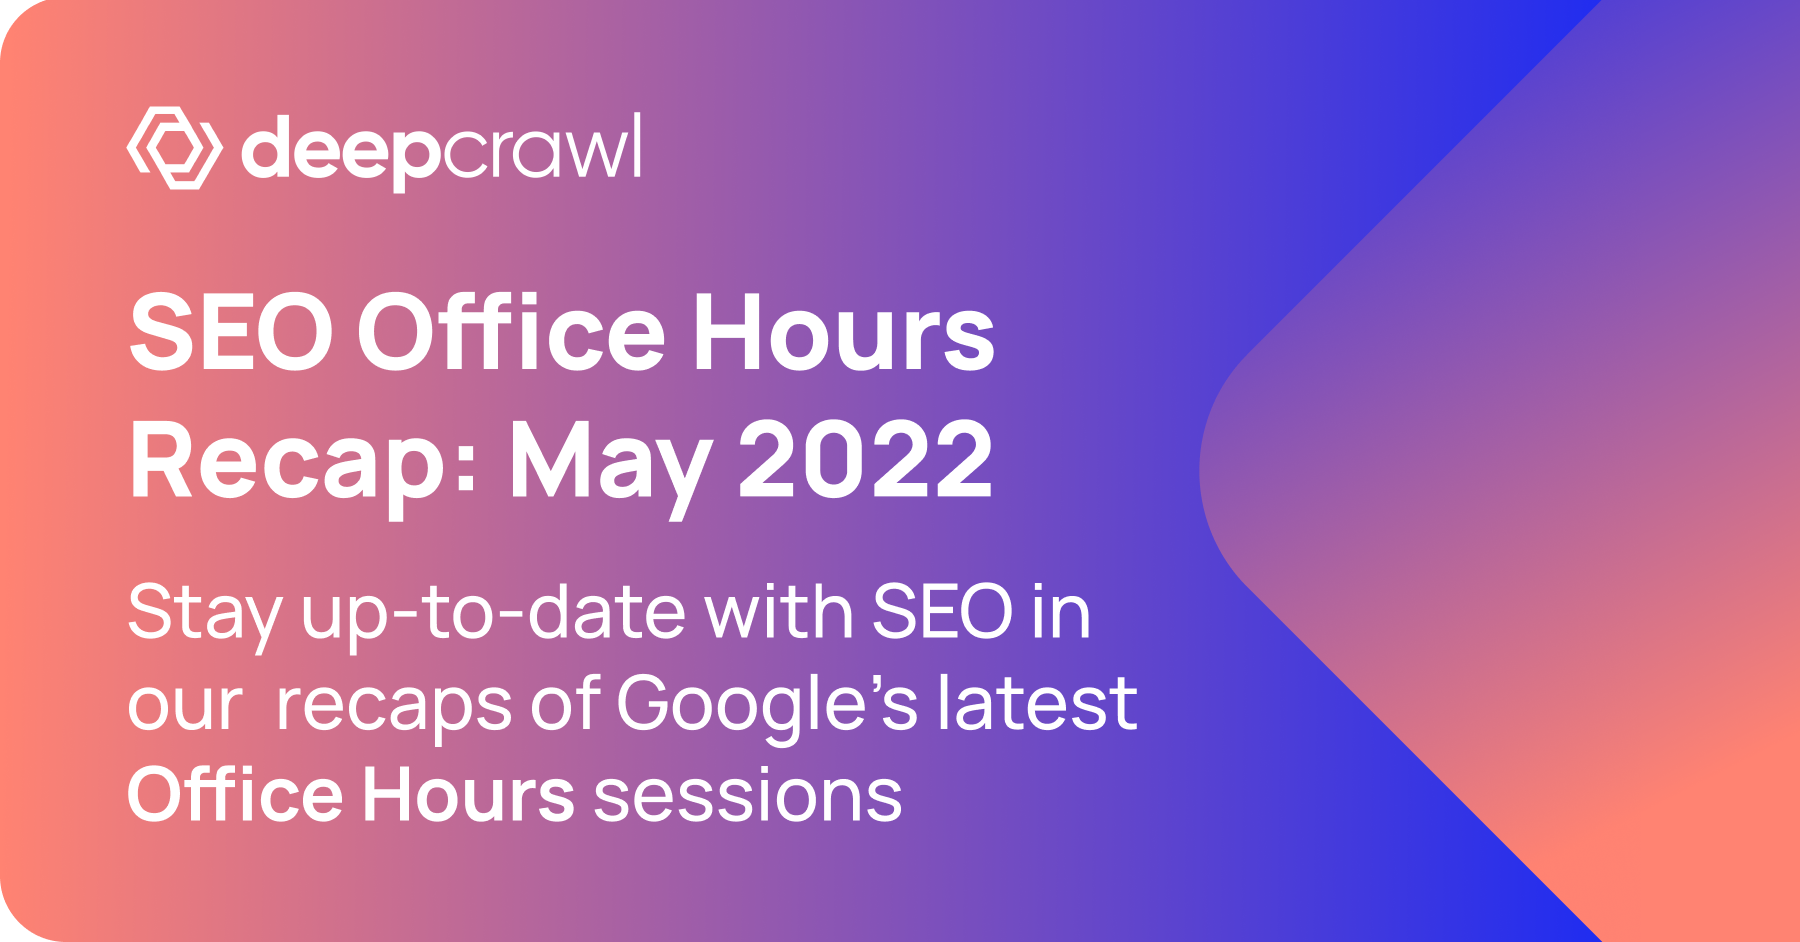 Deepcrawl's recap of Google Search Central's SEO Office Hours sessions - early May 2022